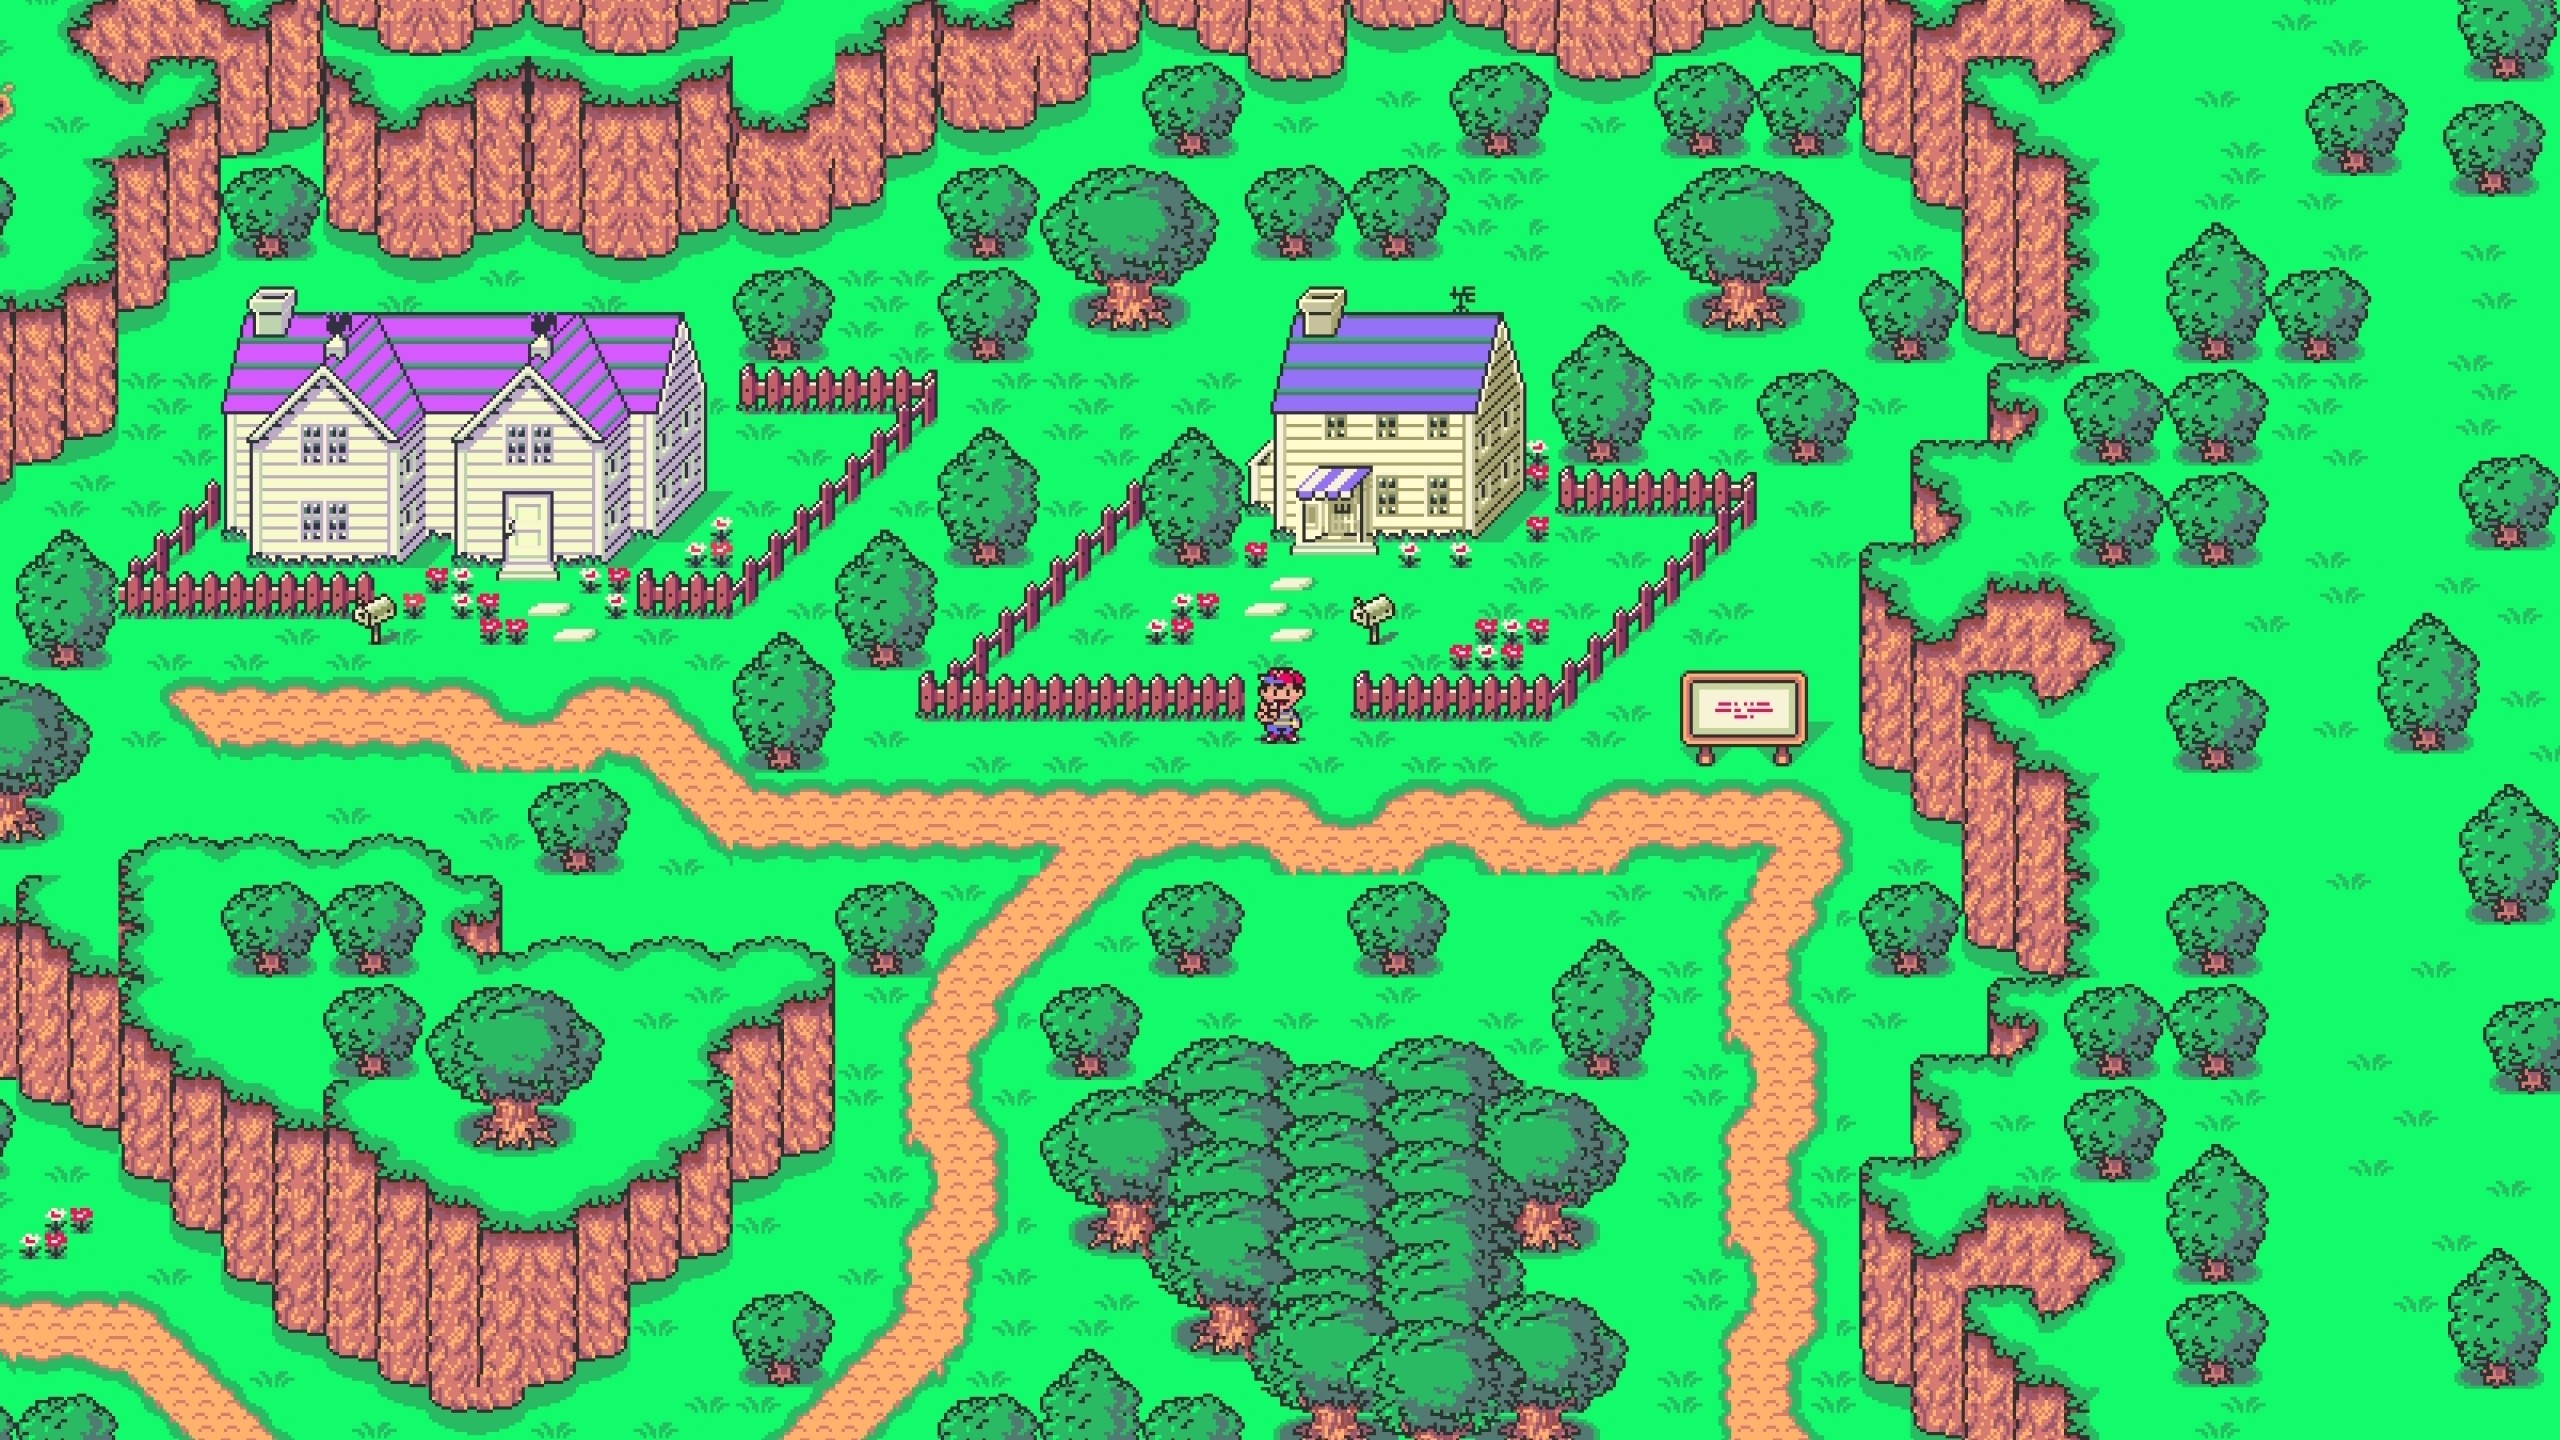 Mother 1 game. Earthbound (игра). Earthbound 1994. Earthbound Далаам'. Earthbound фон.